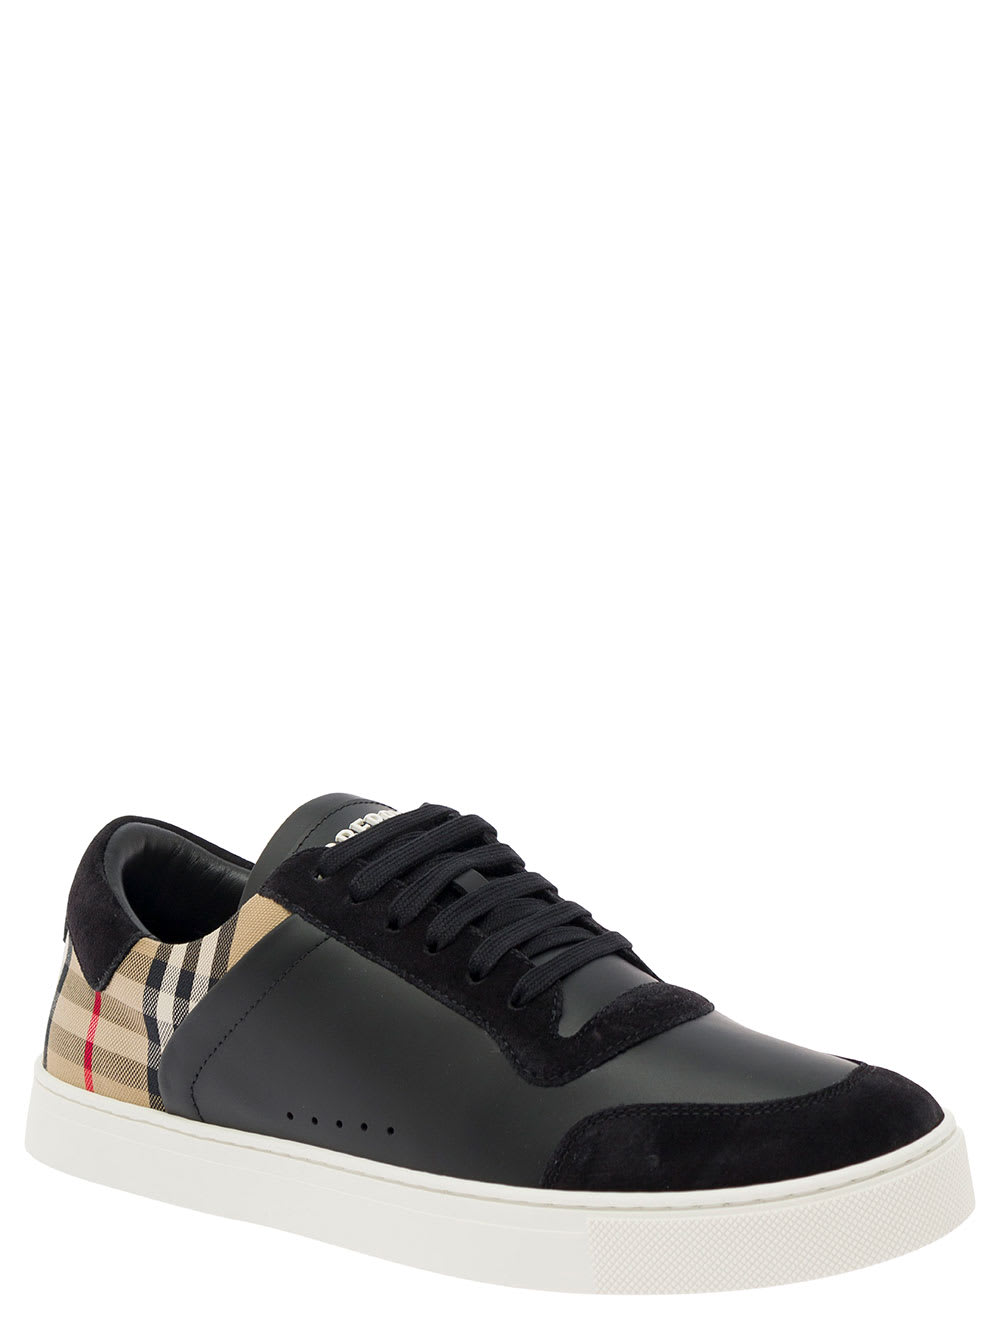 Shop Burberry Black Sneakers With Suede Details And Check Motif In Leather Blend Man